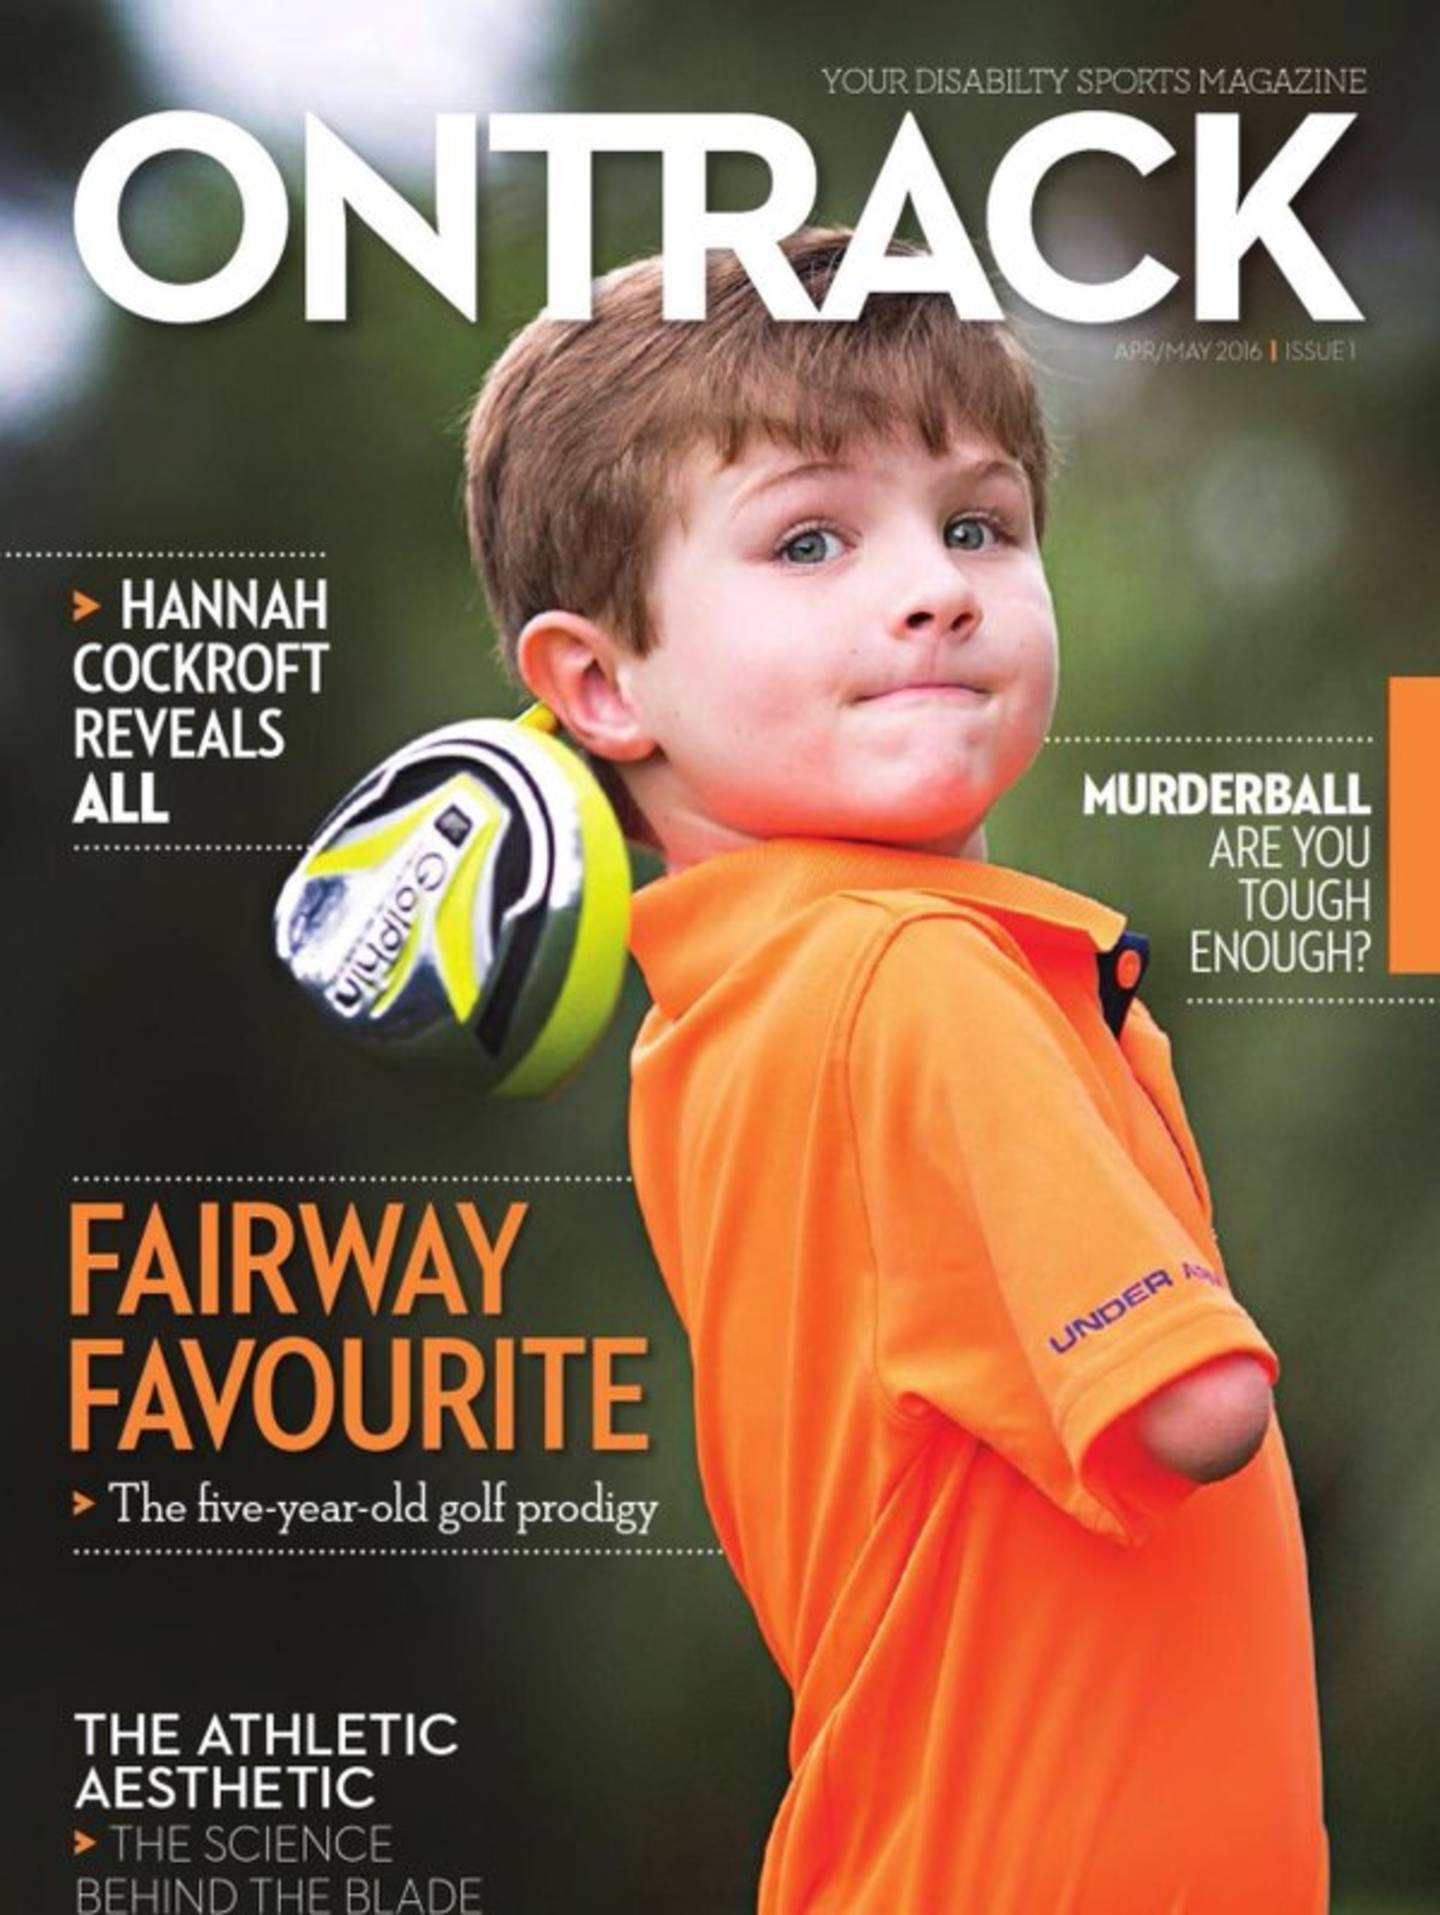 On track magazine cover